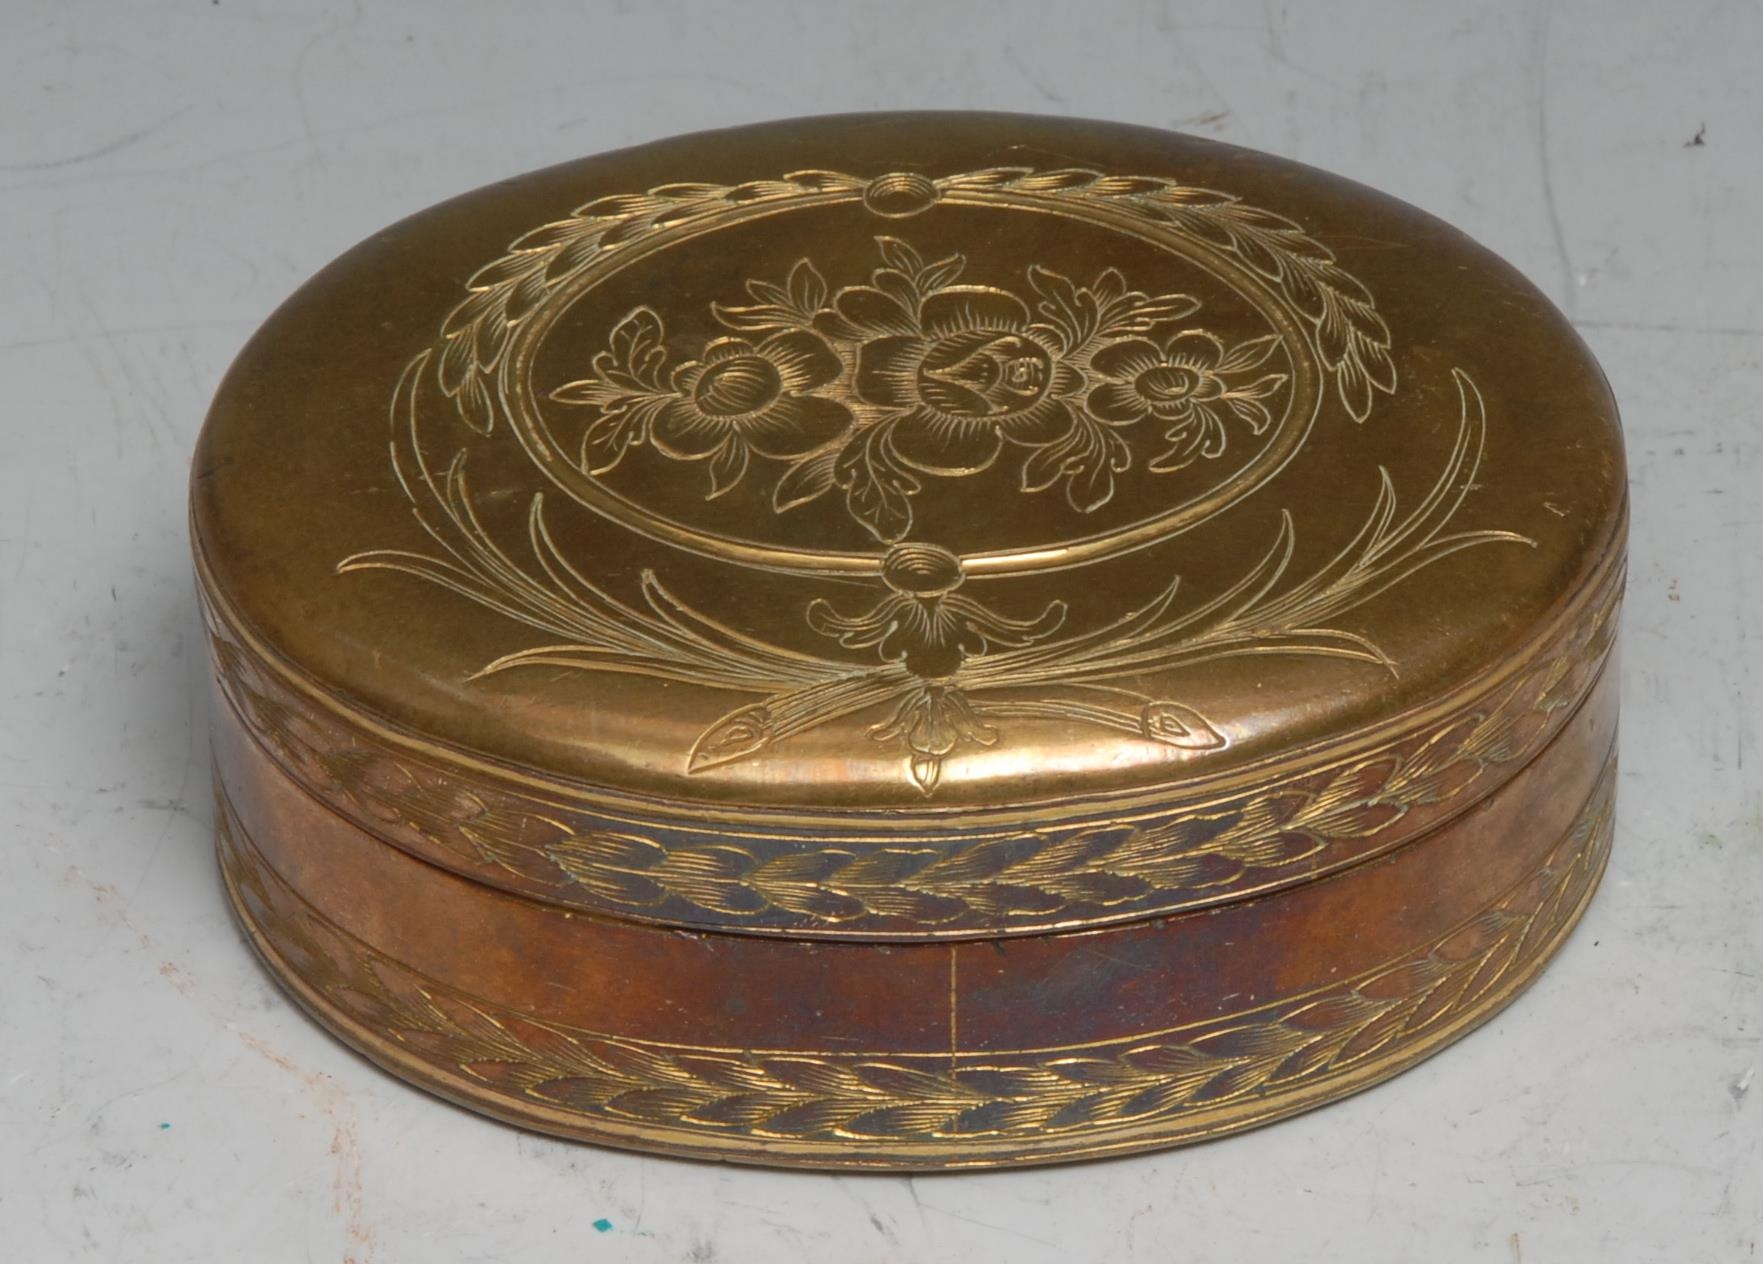 A late 18th century gilt copper oval table snuff box, engraved with flowers and palm fronds, stand-